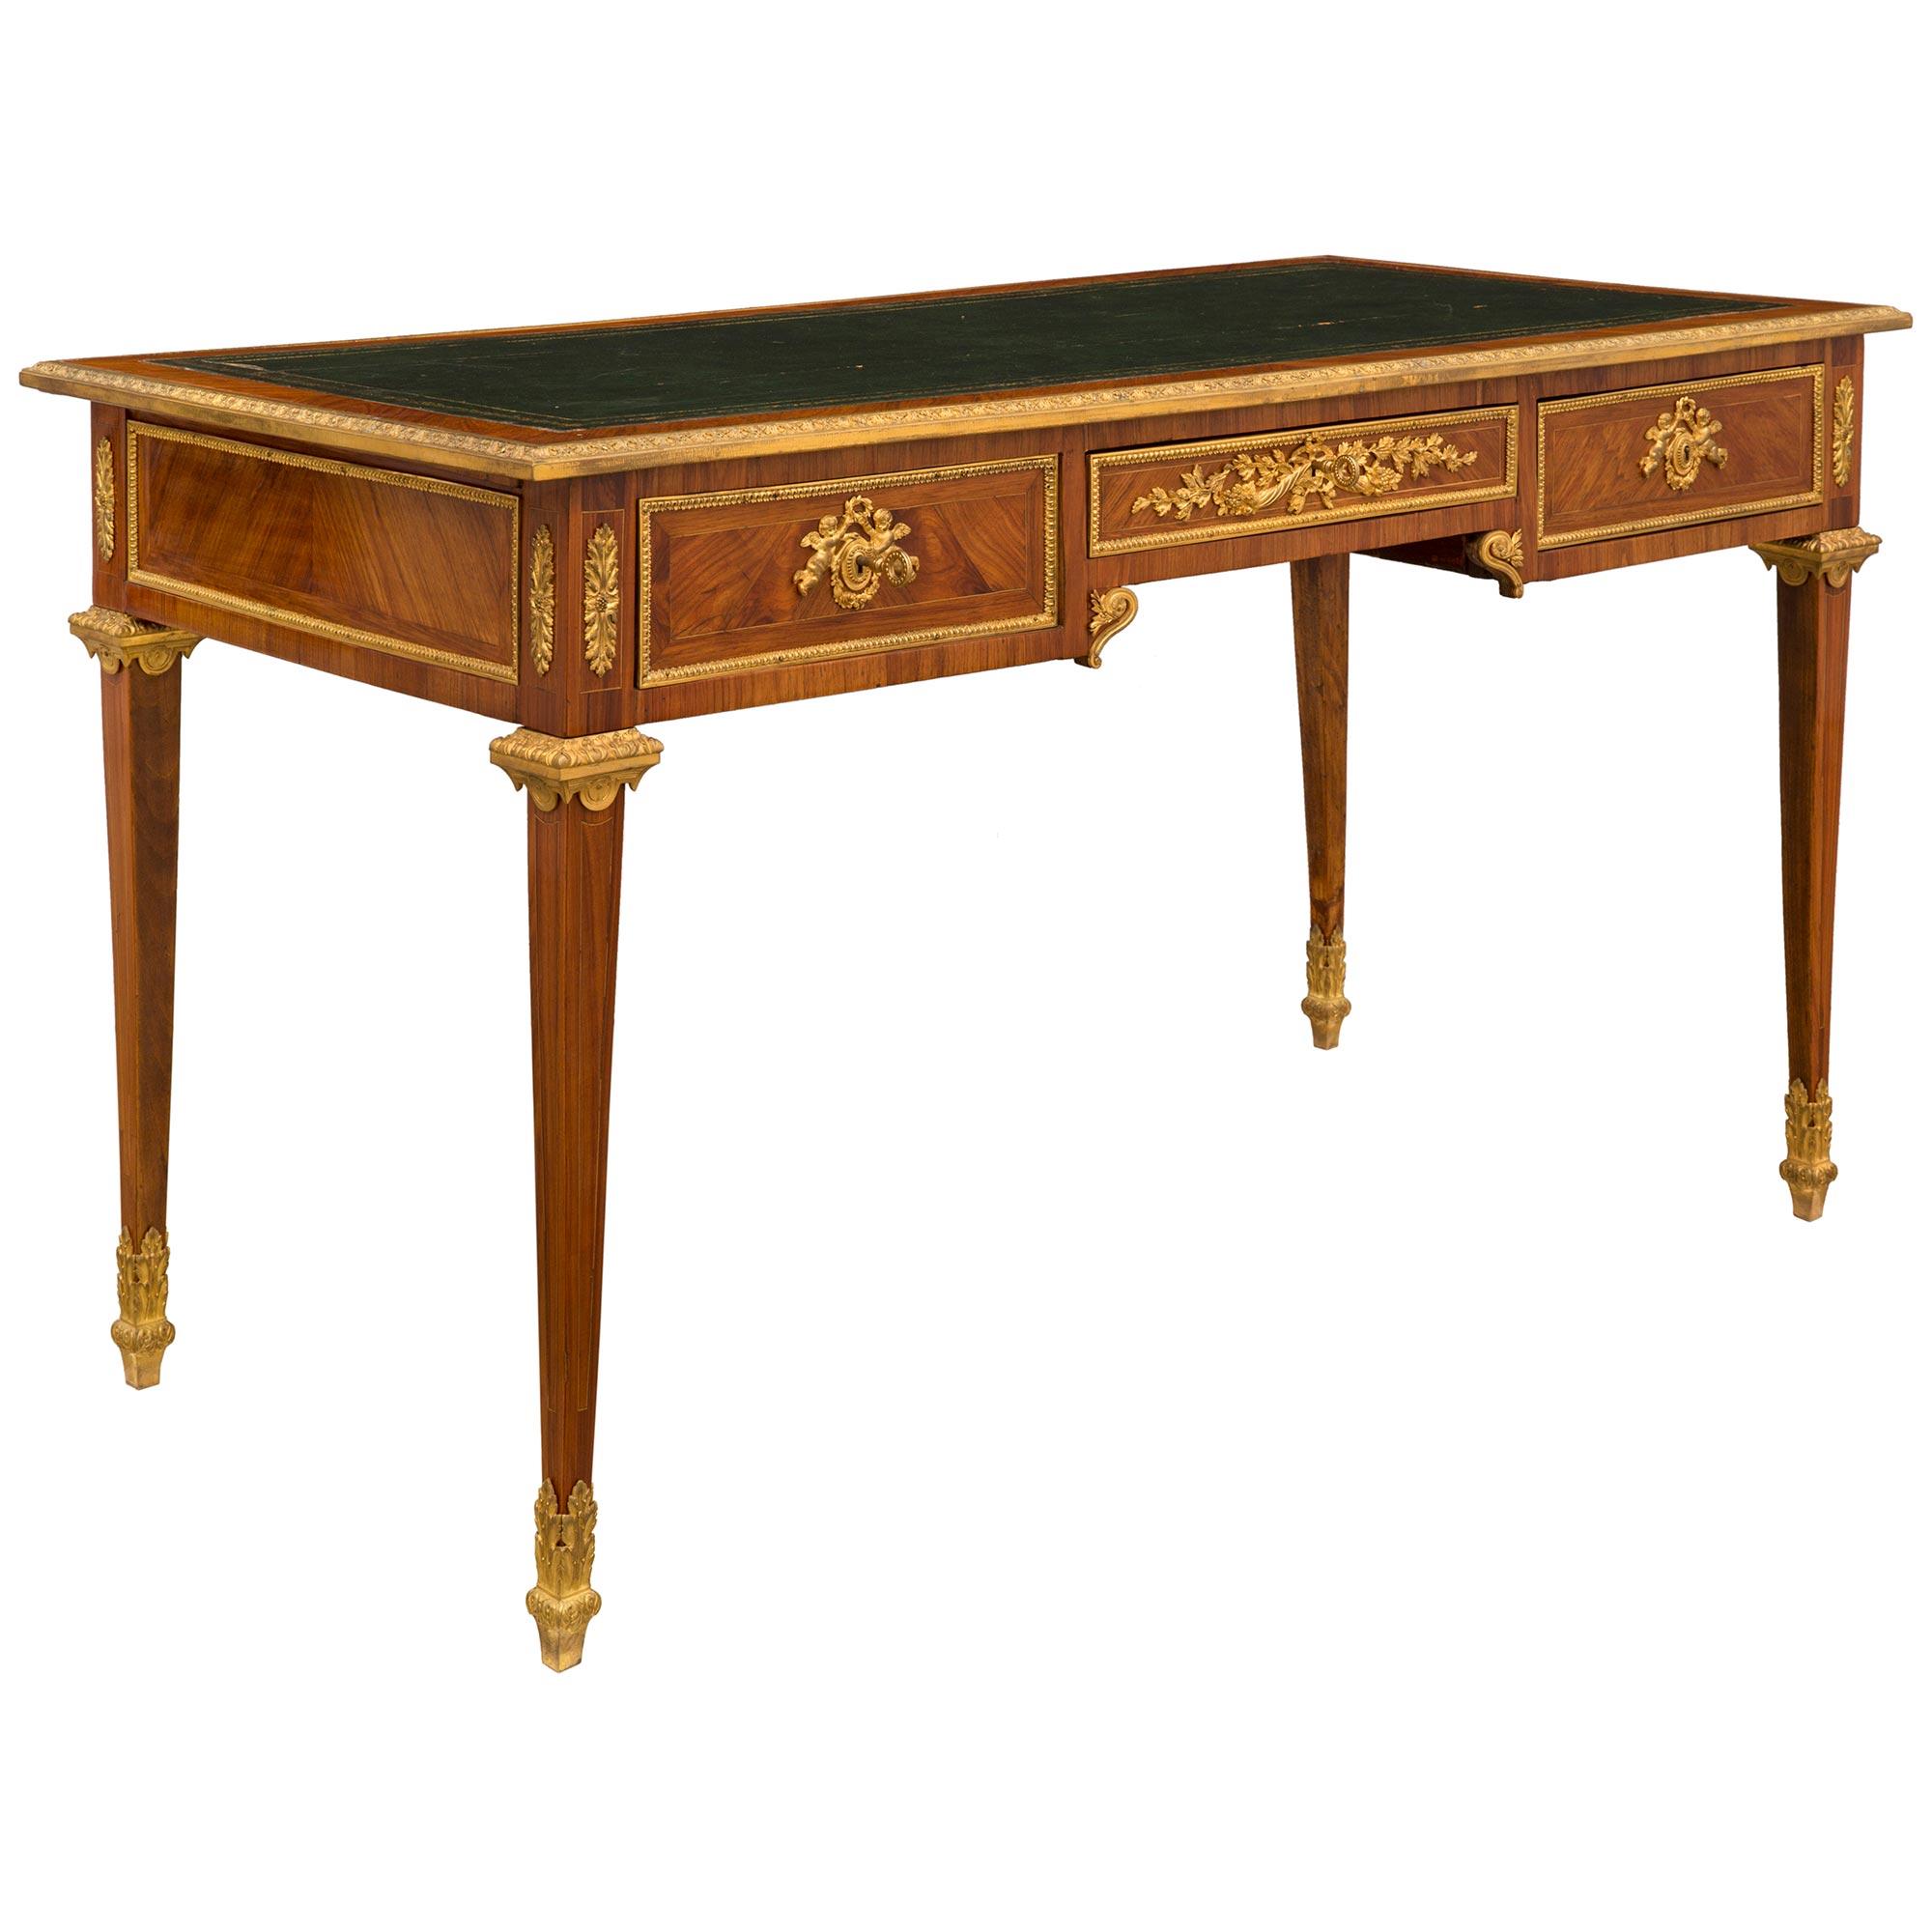 Mid 18th Century French Louis XVI Period Tulipwood and Ormolu Bureau Plat In Good Condition For Sale In West Palm Beach, FL